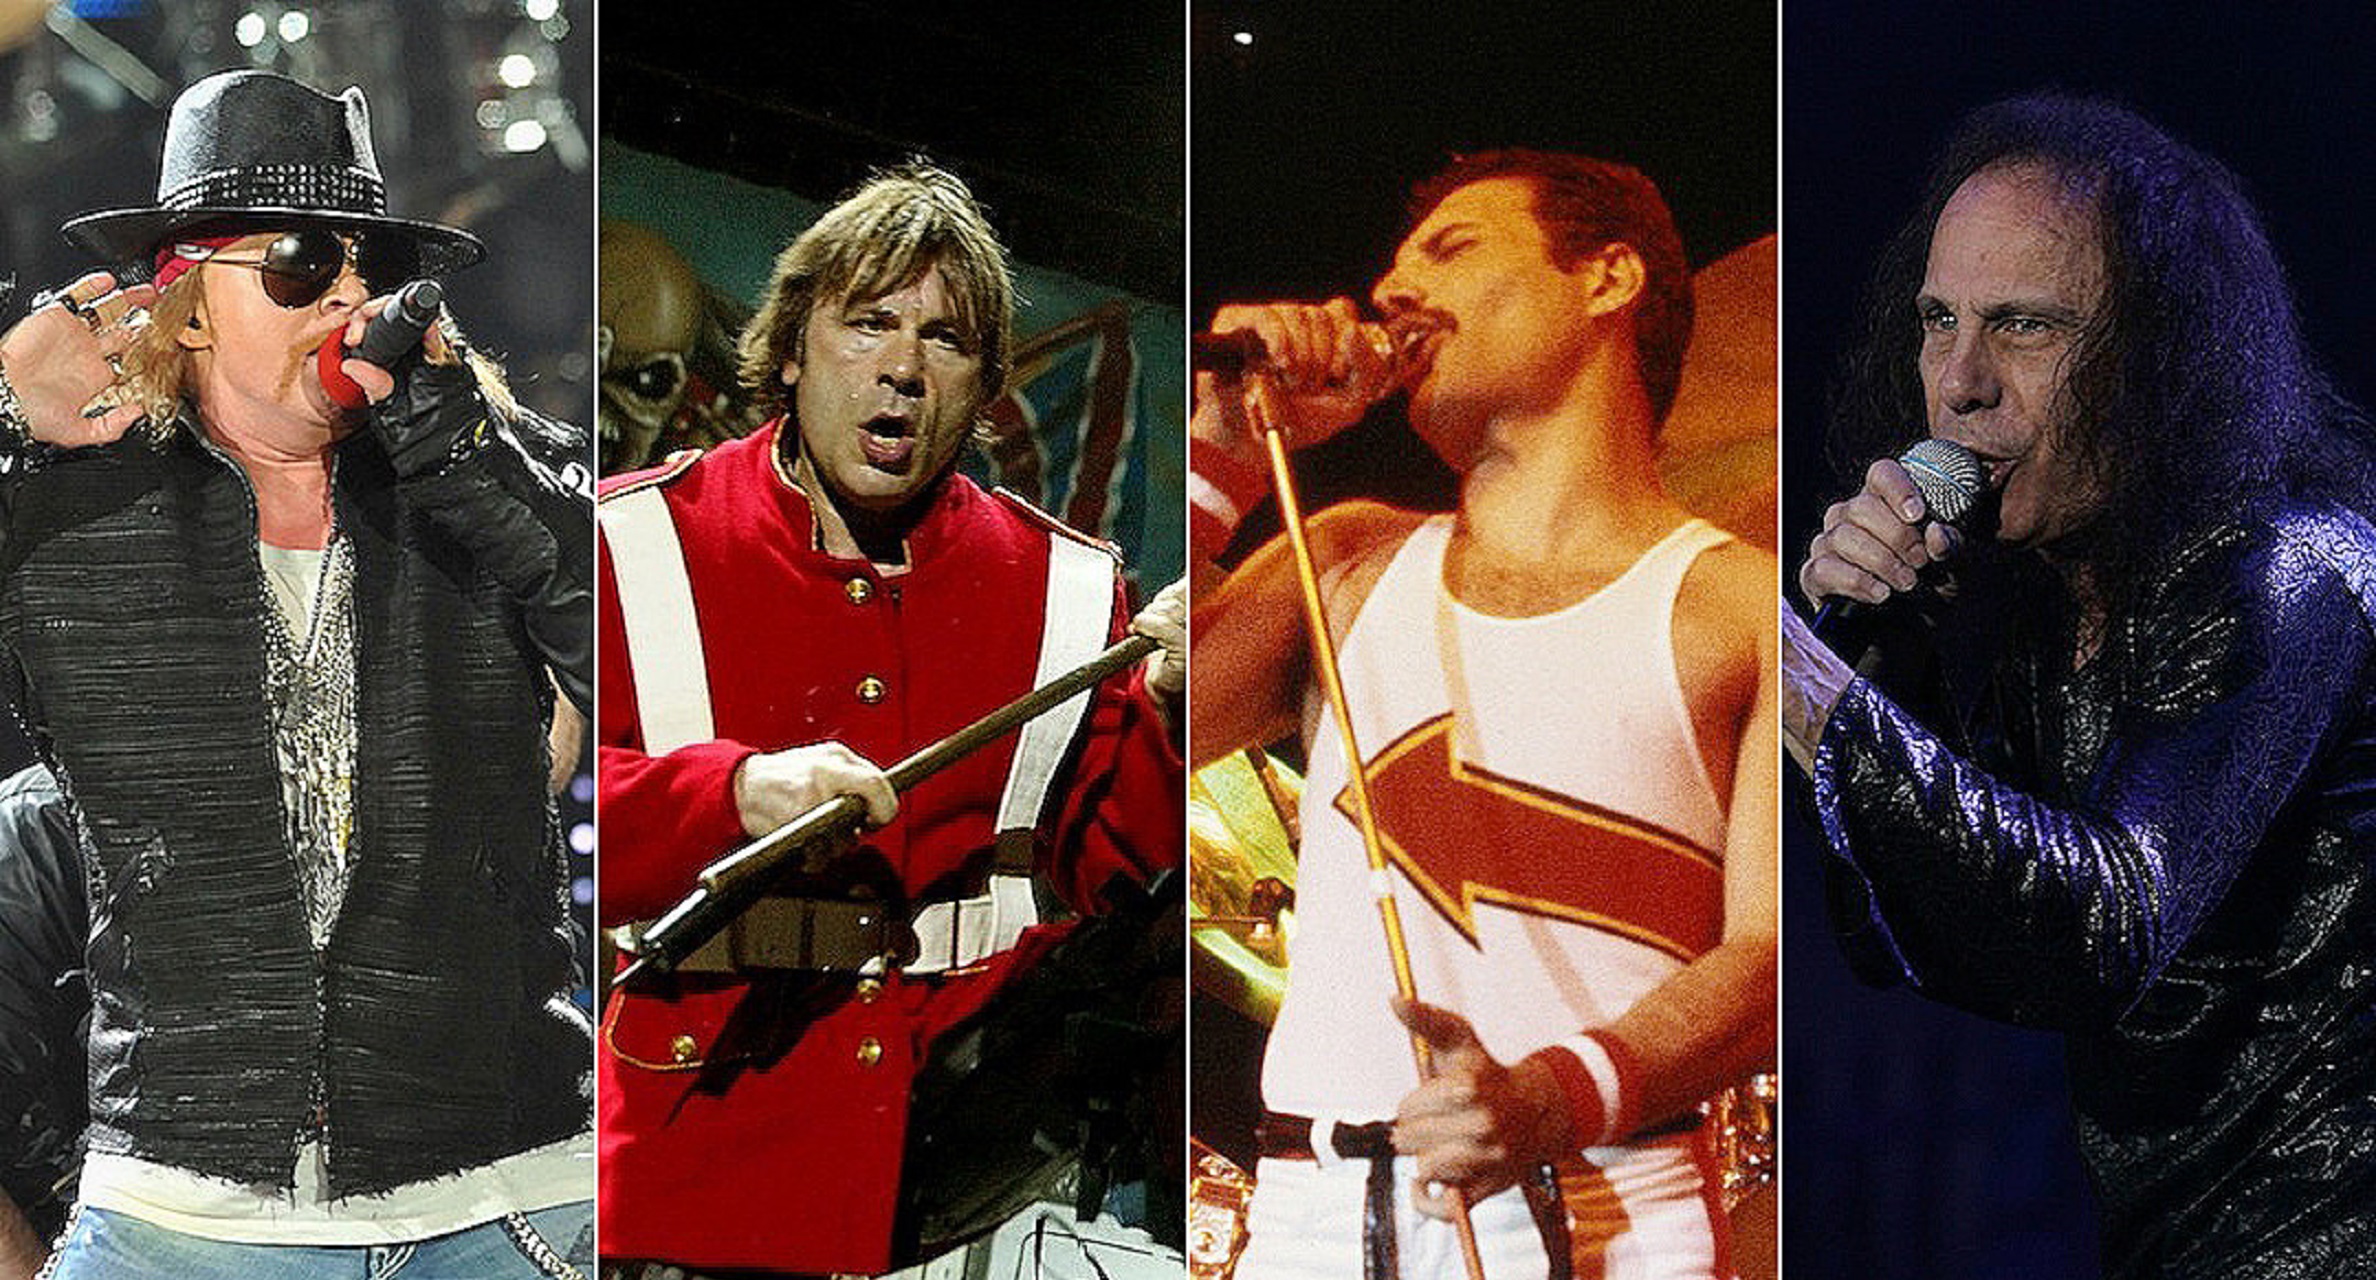 POLL: Who Is The Best Male Rock Singer Of All Time? Vote Here!